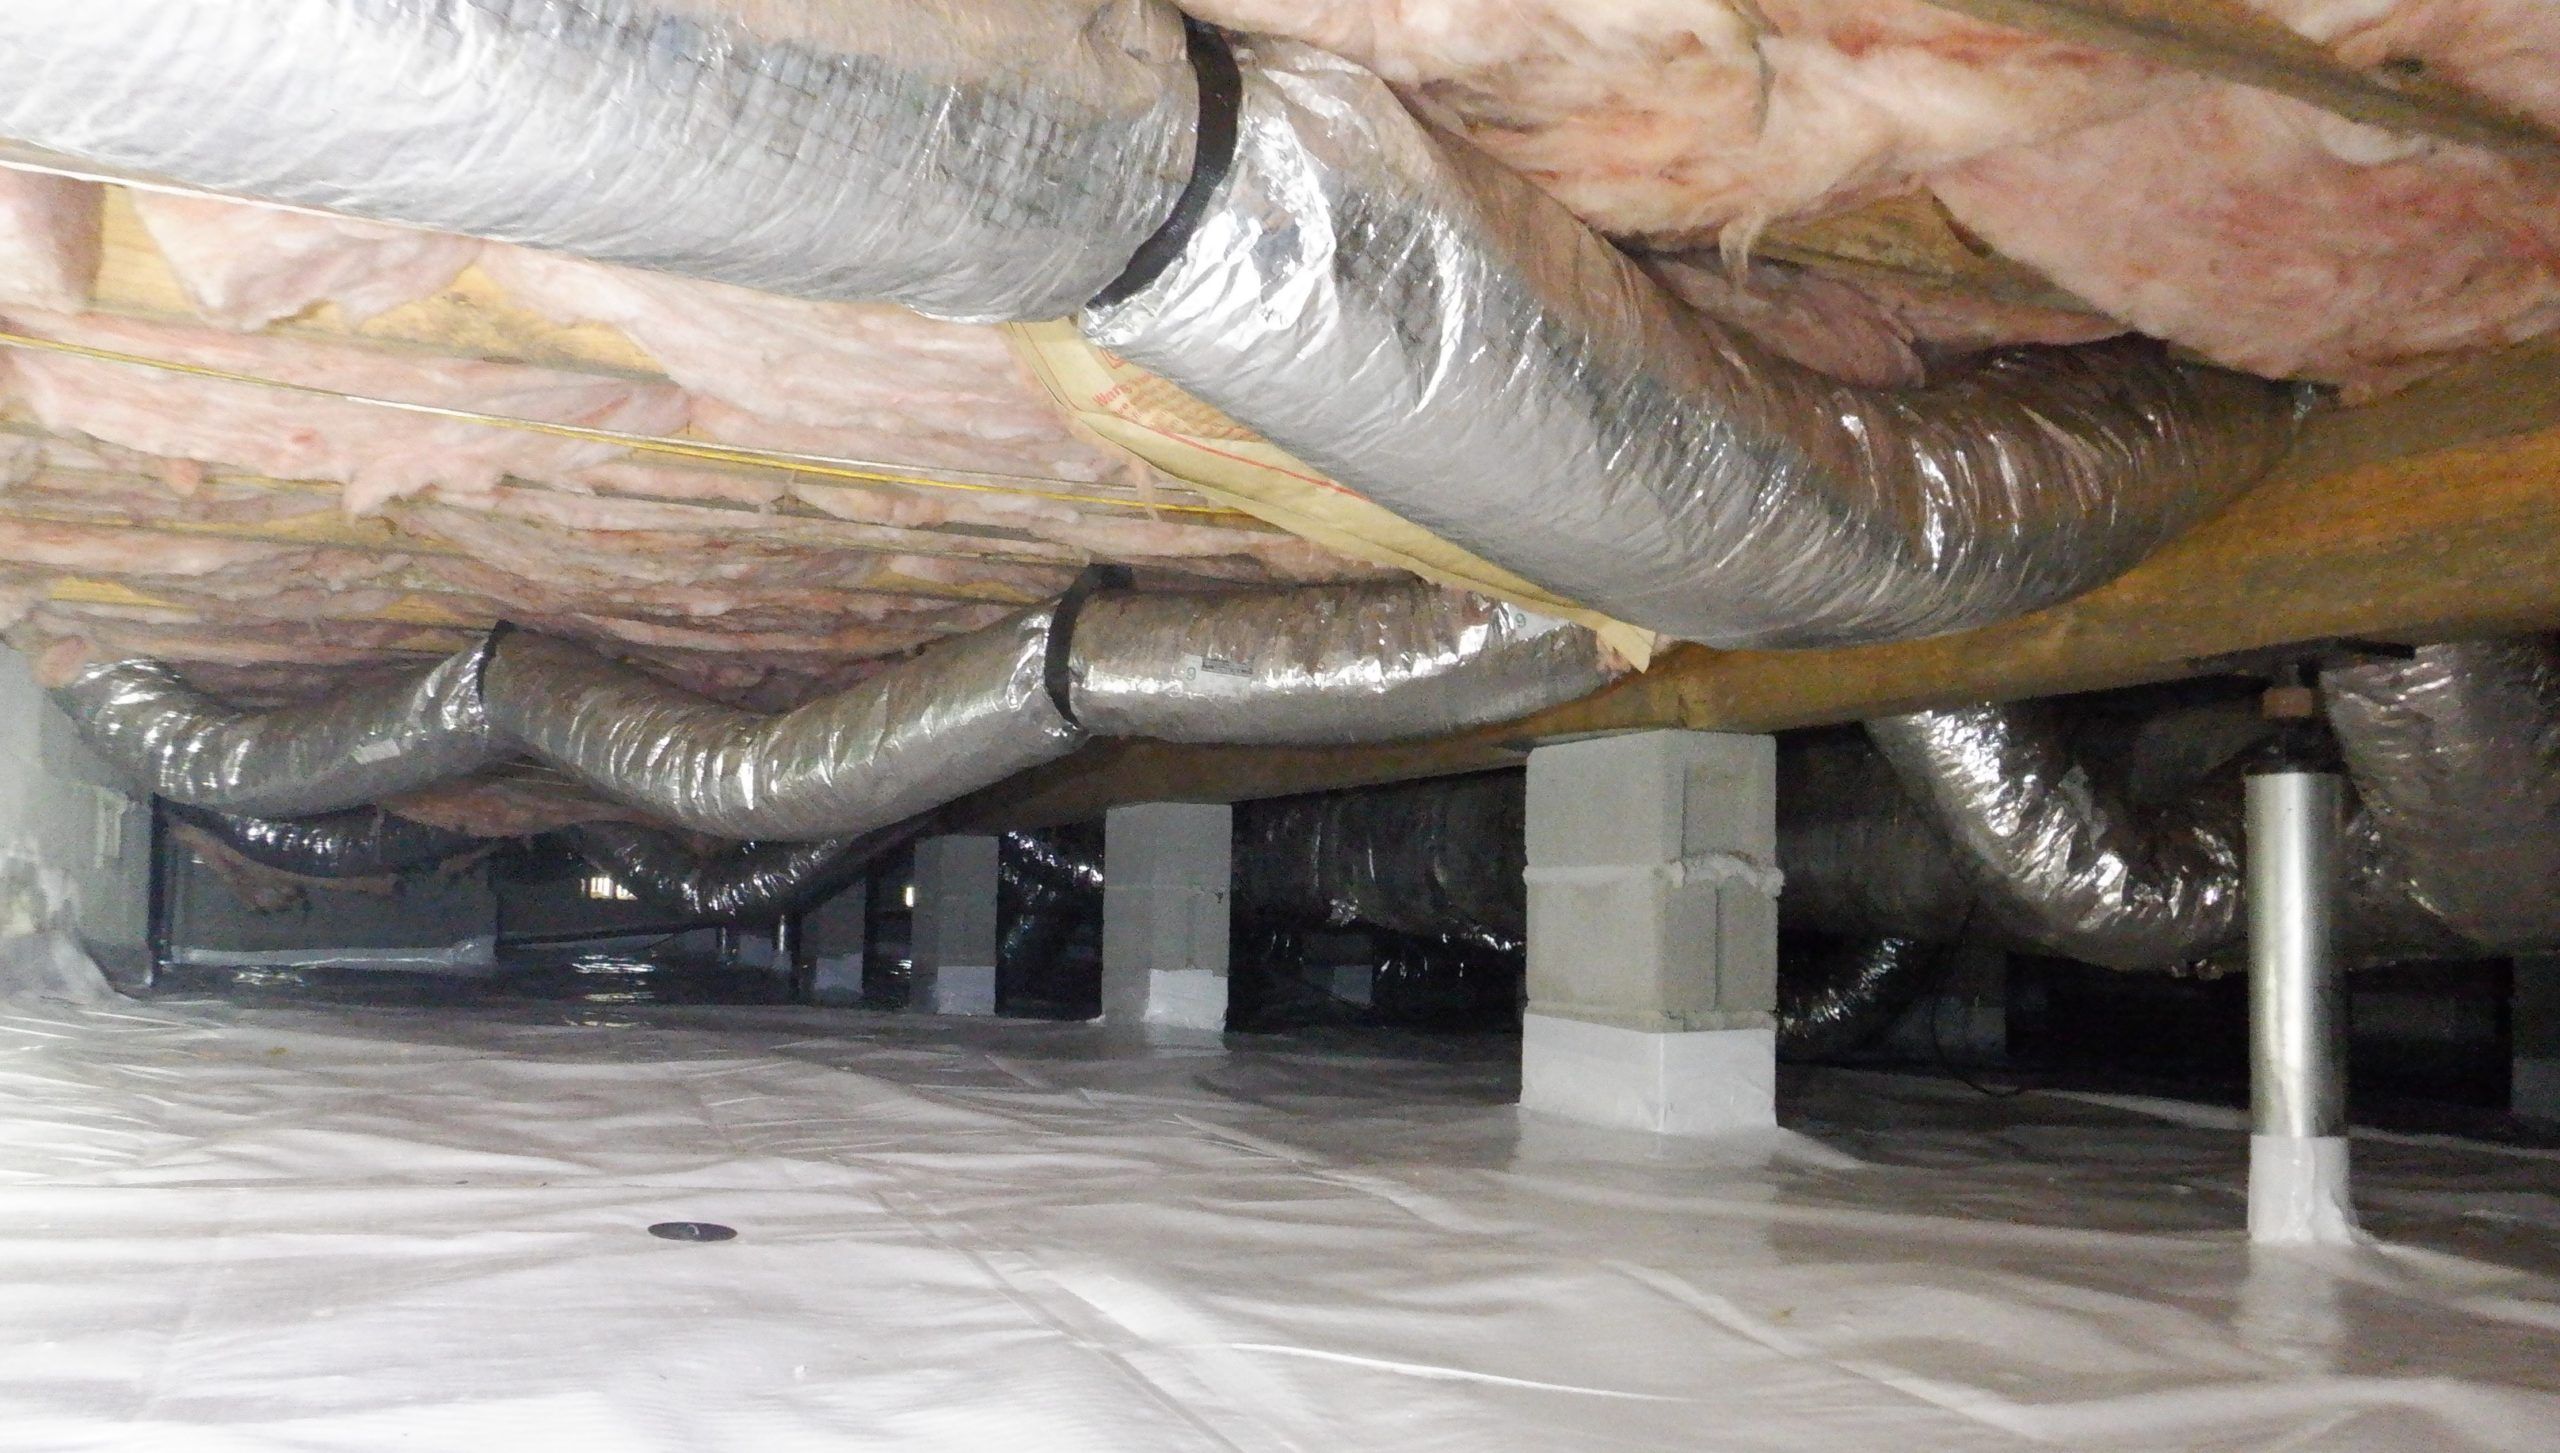 The Best Solutions for Crawl Space Moisture Control